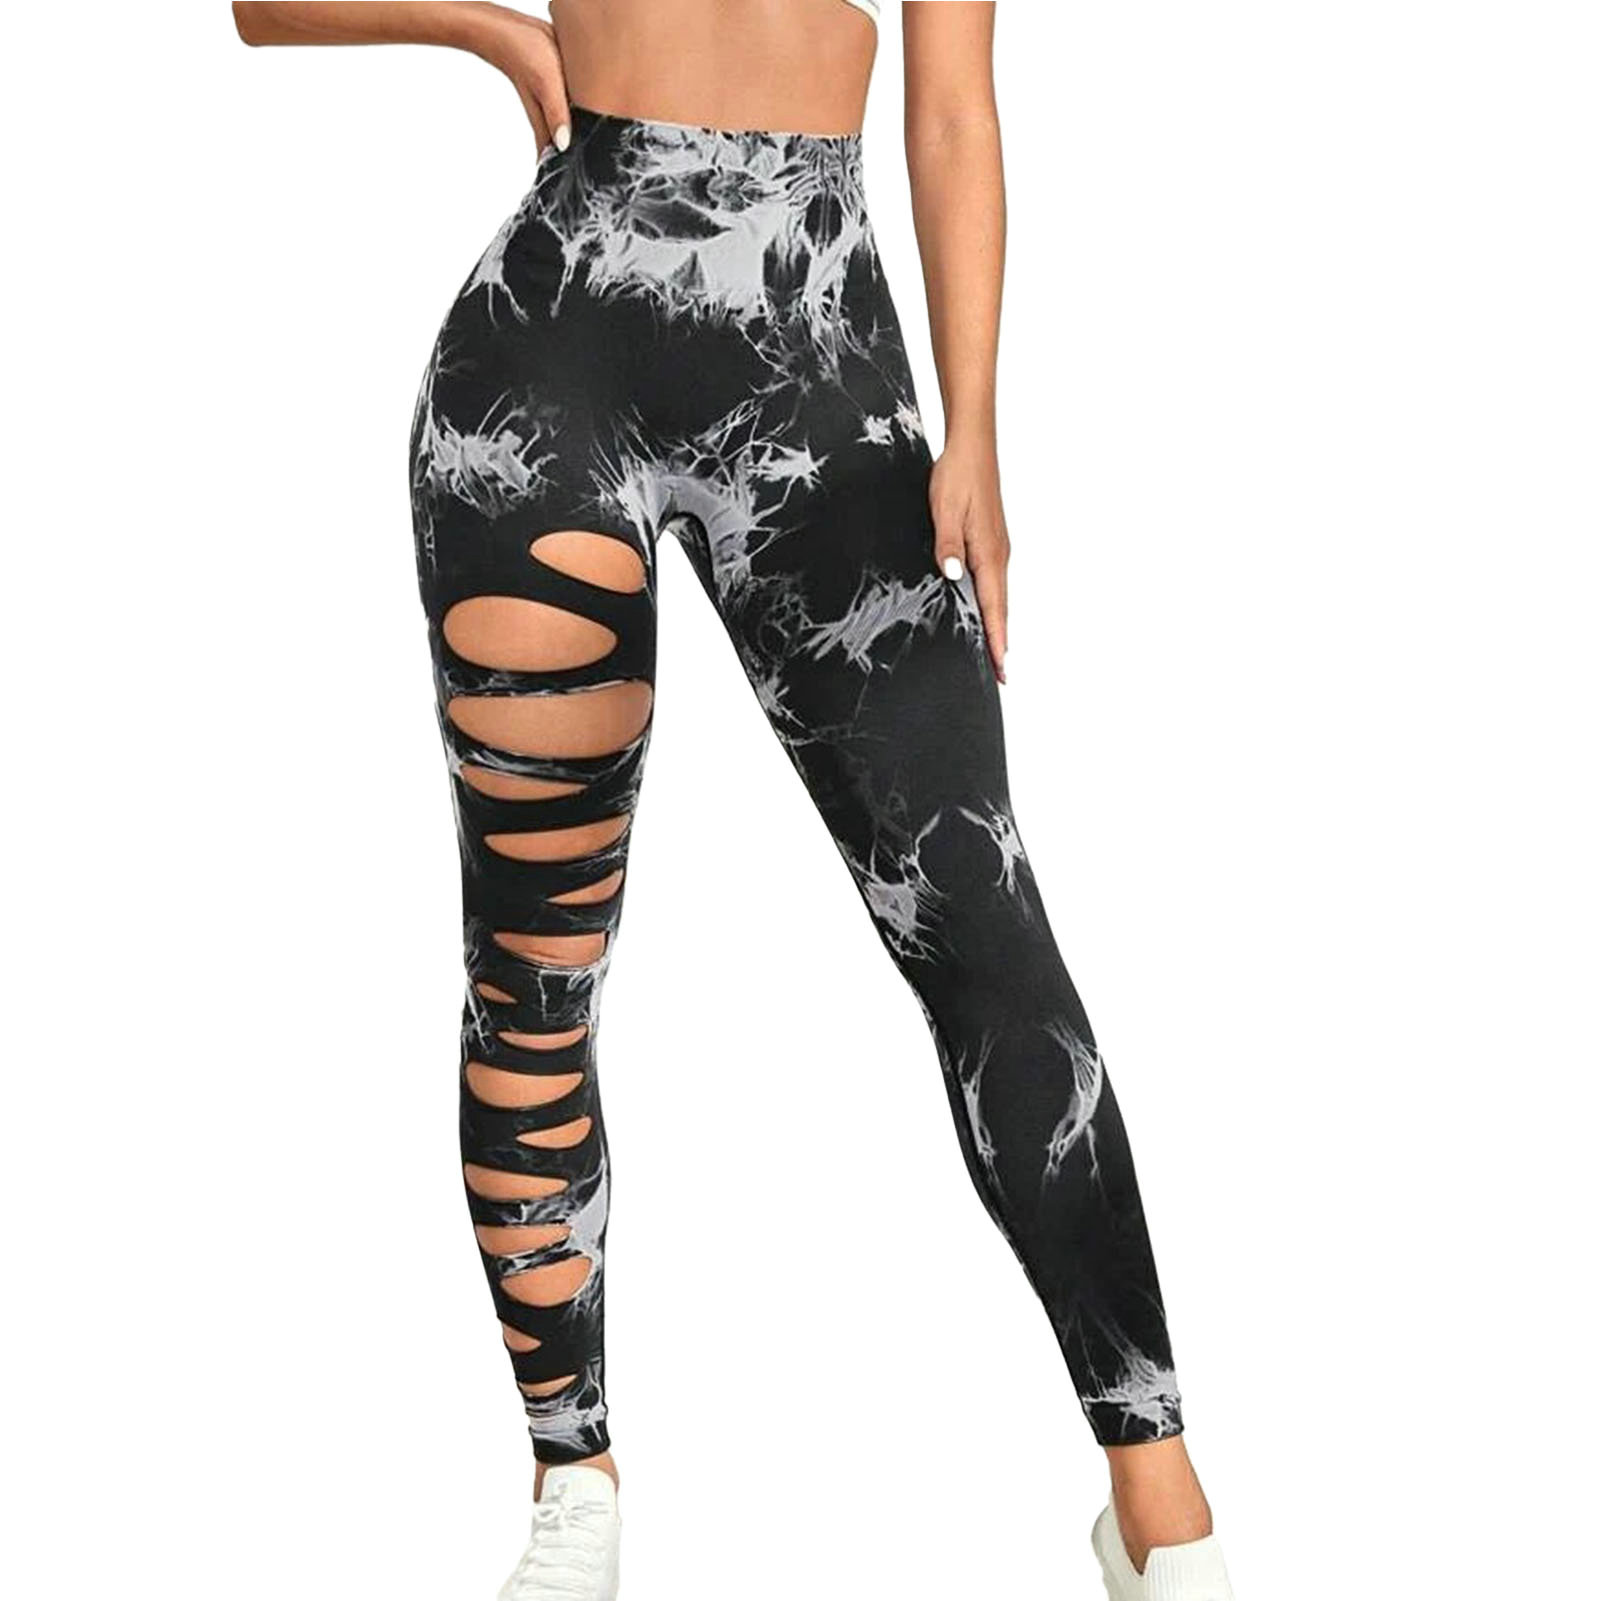 Good Partners Elastic High Waist Yoga Leggings High Waist Yoga Leggings Tie  Dye Leggings for Women High Waist Hip Lifting and Perfect for Gym and  Running